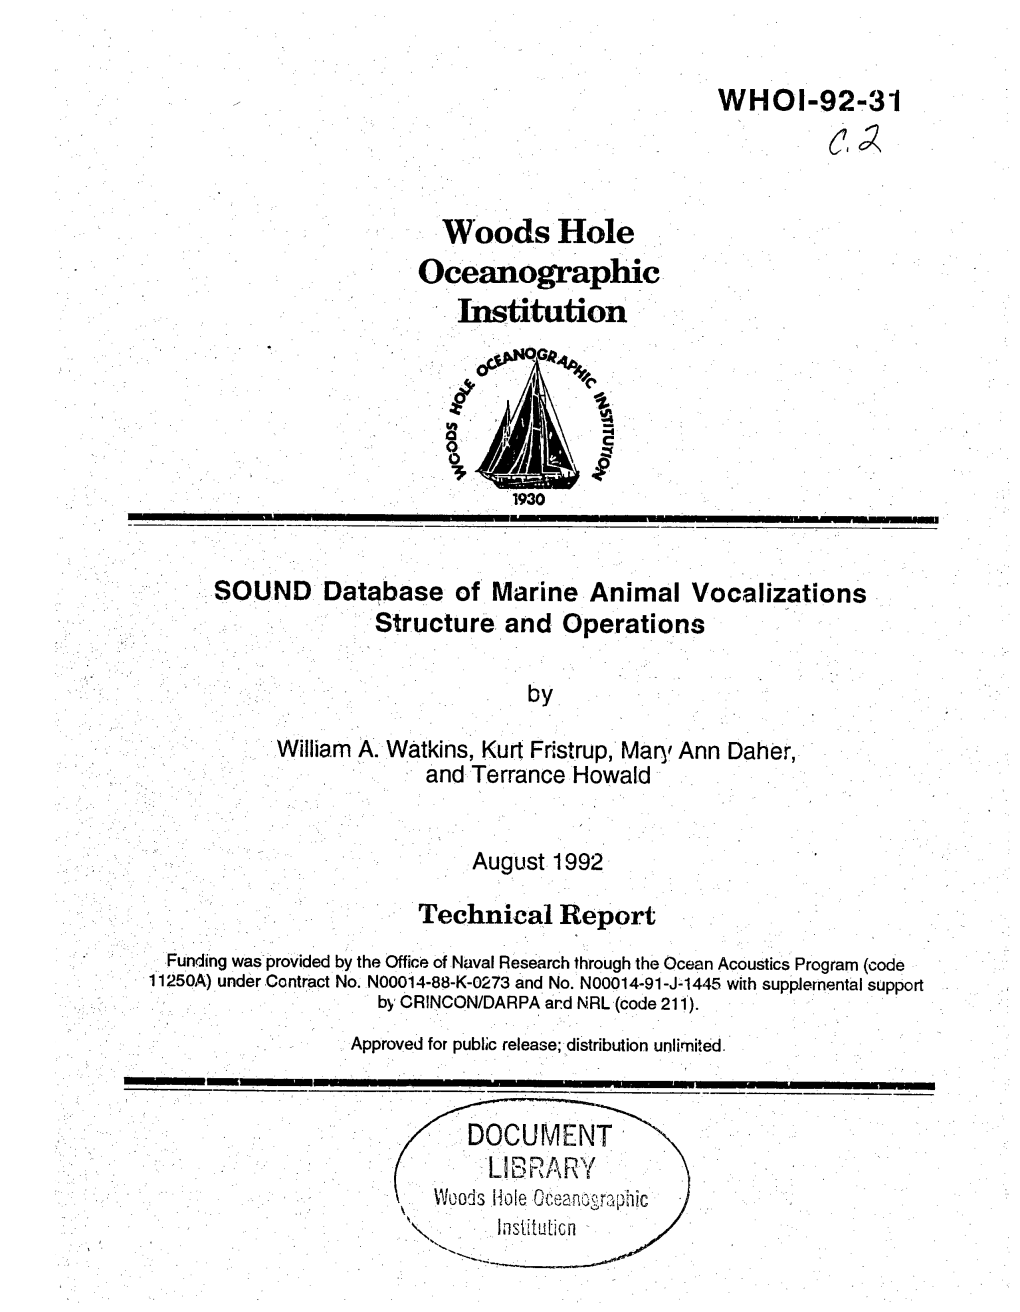 WHOI Technical Report 92-31